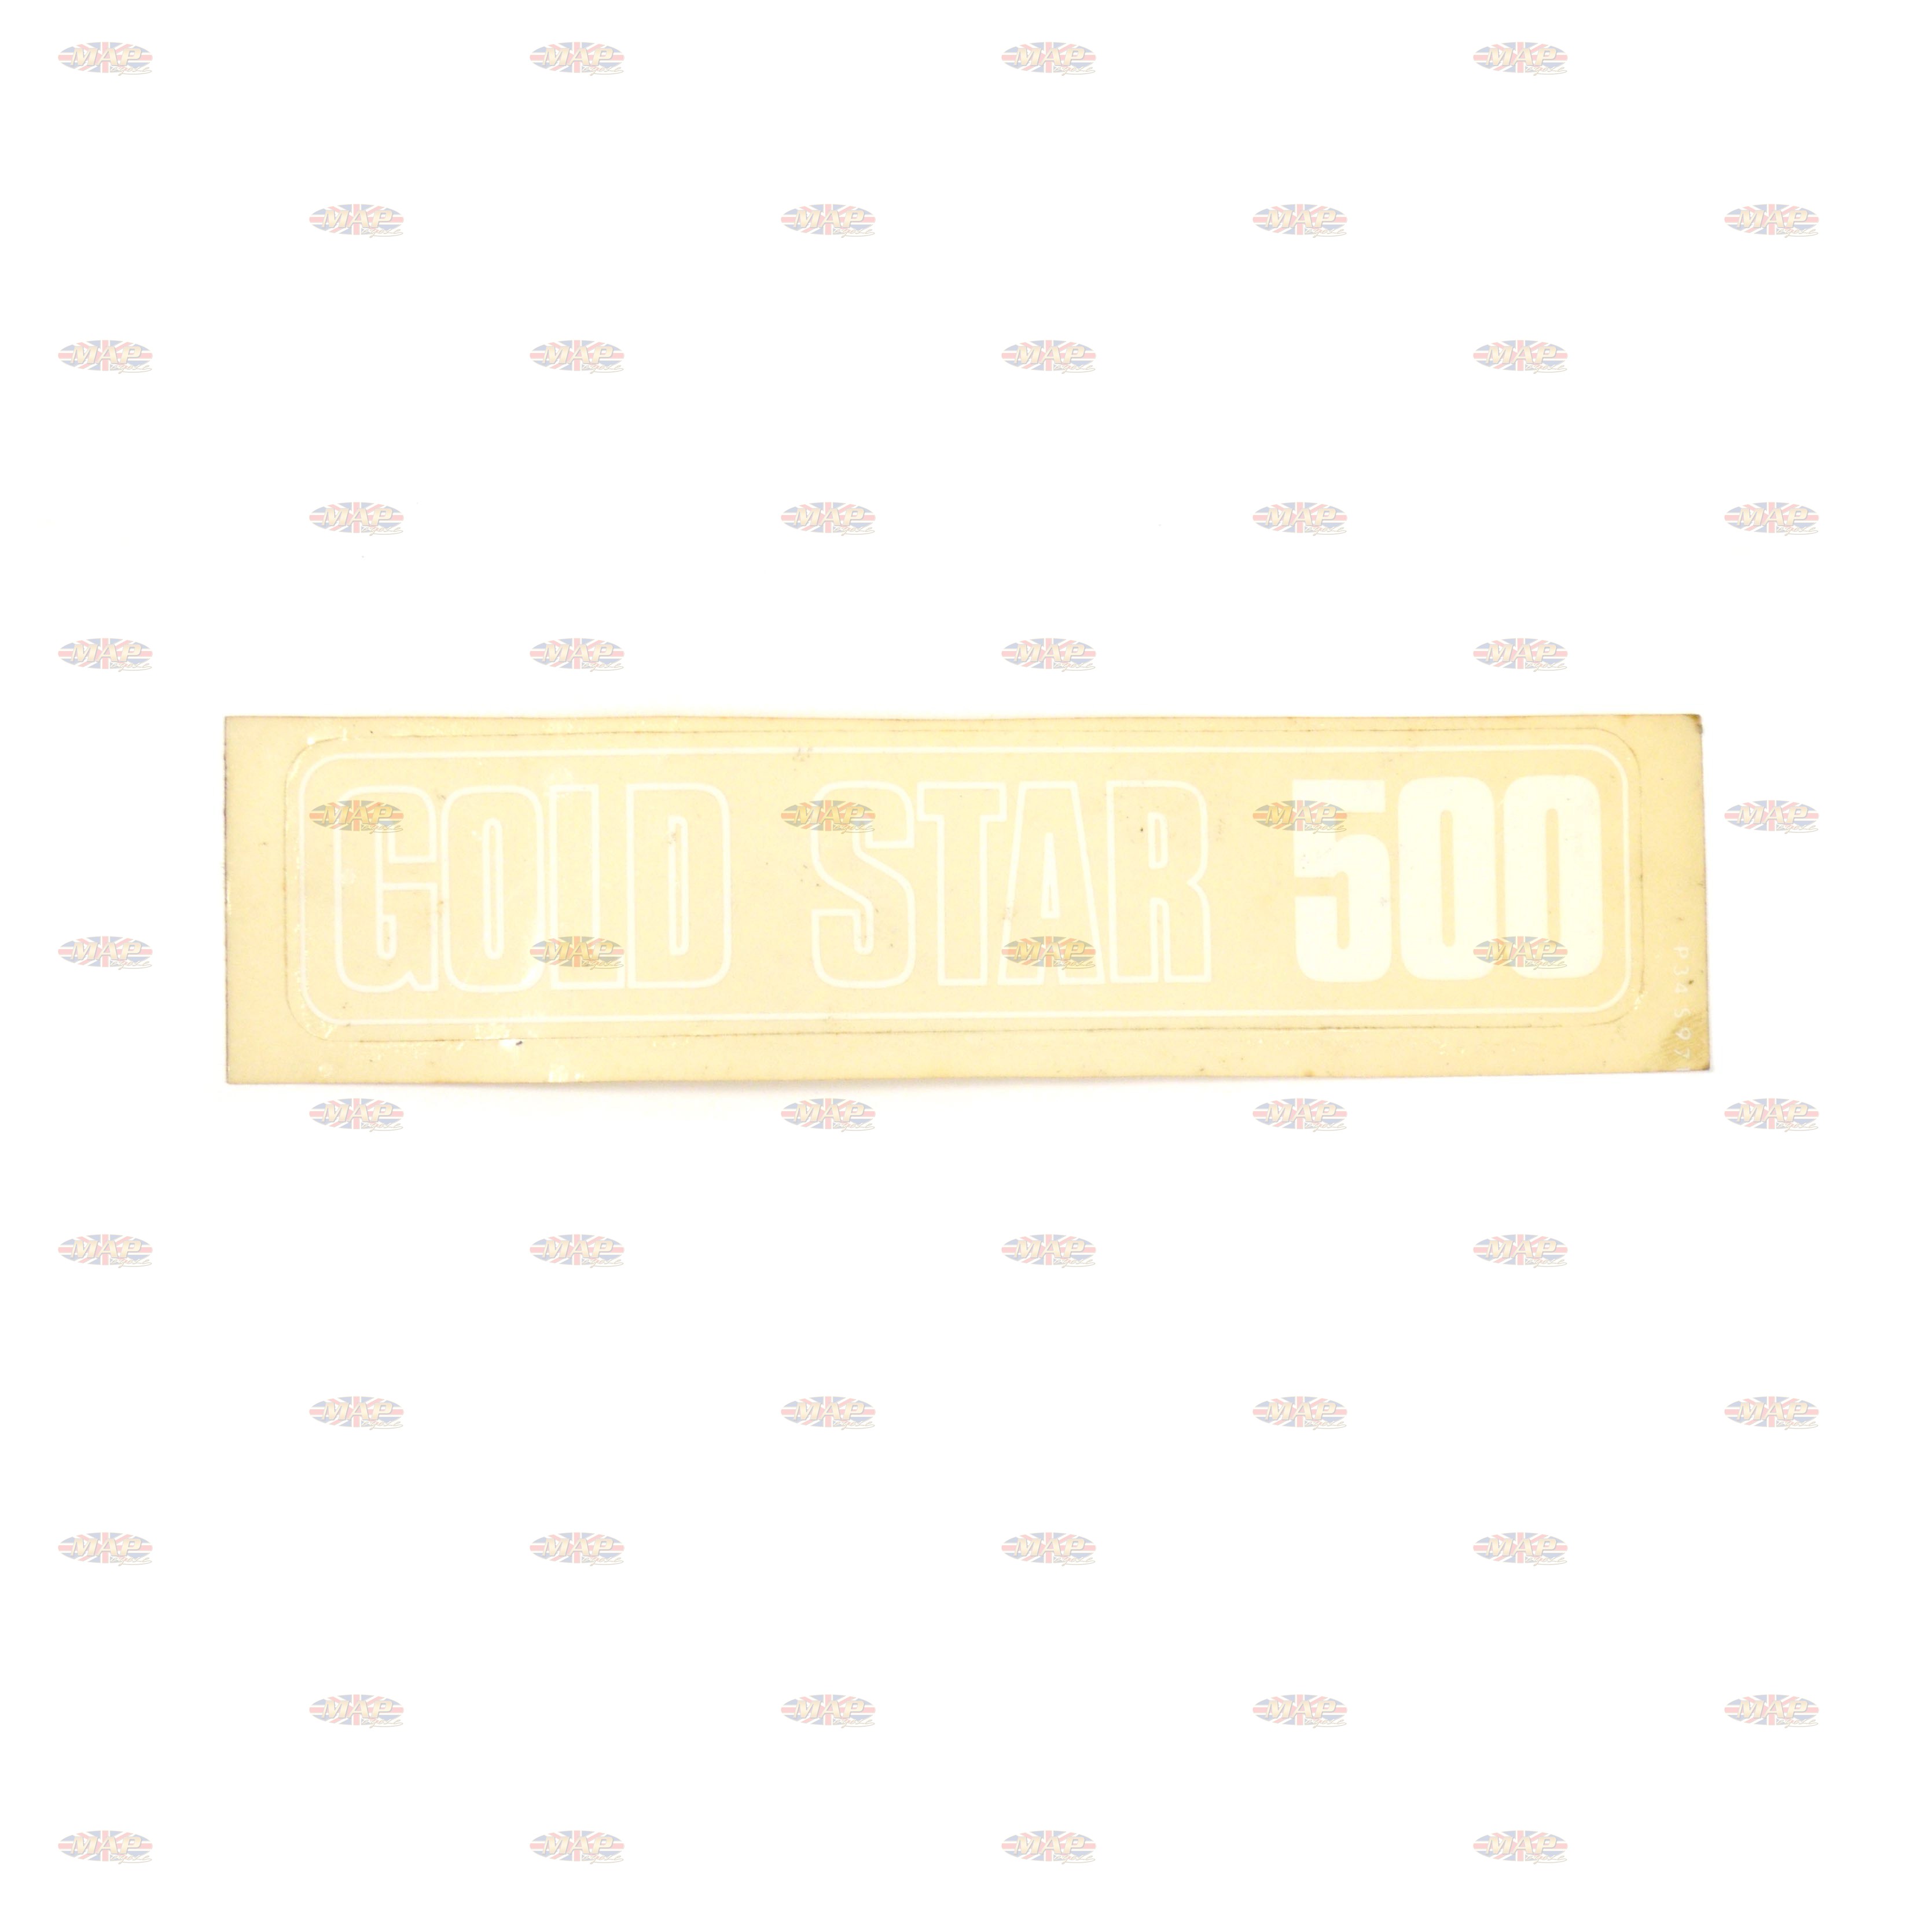 DECAL/  GOLD STAR 500 60-3260